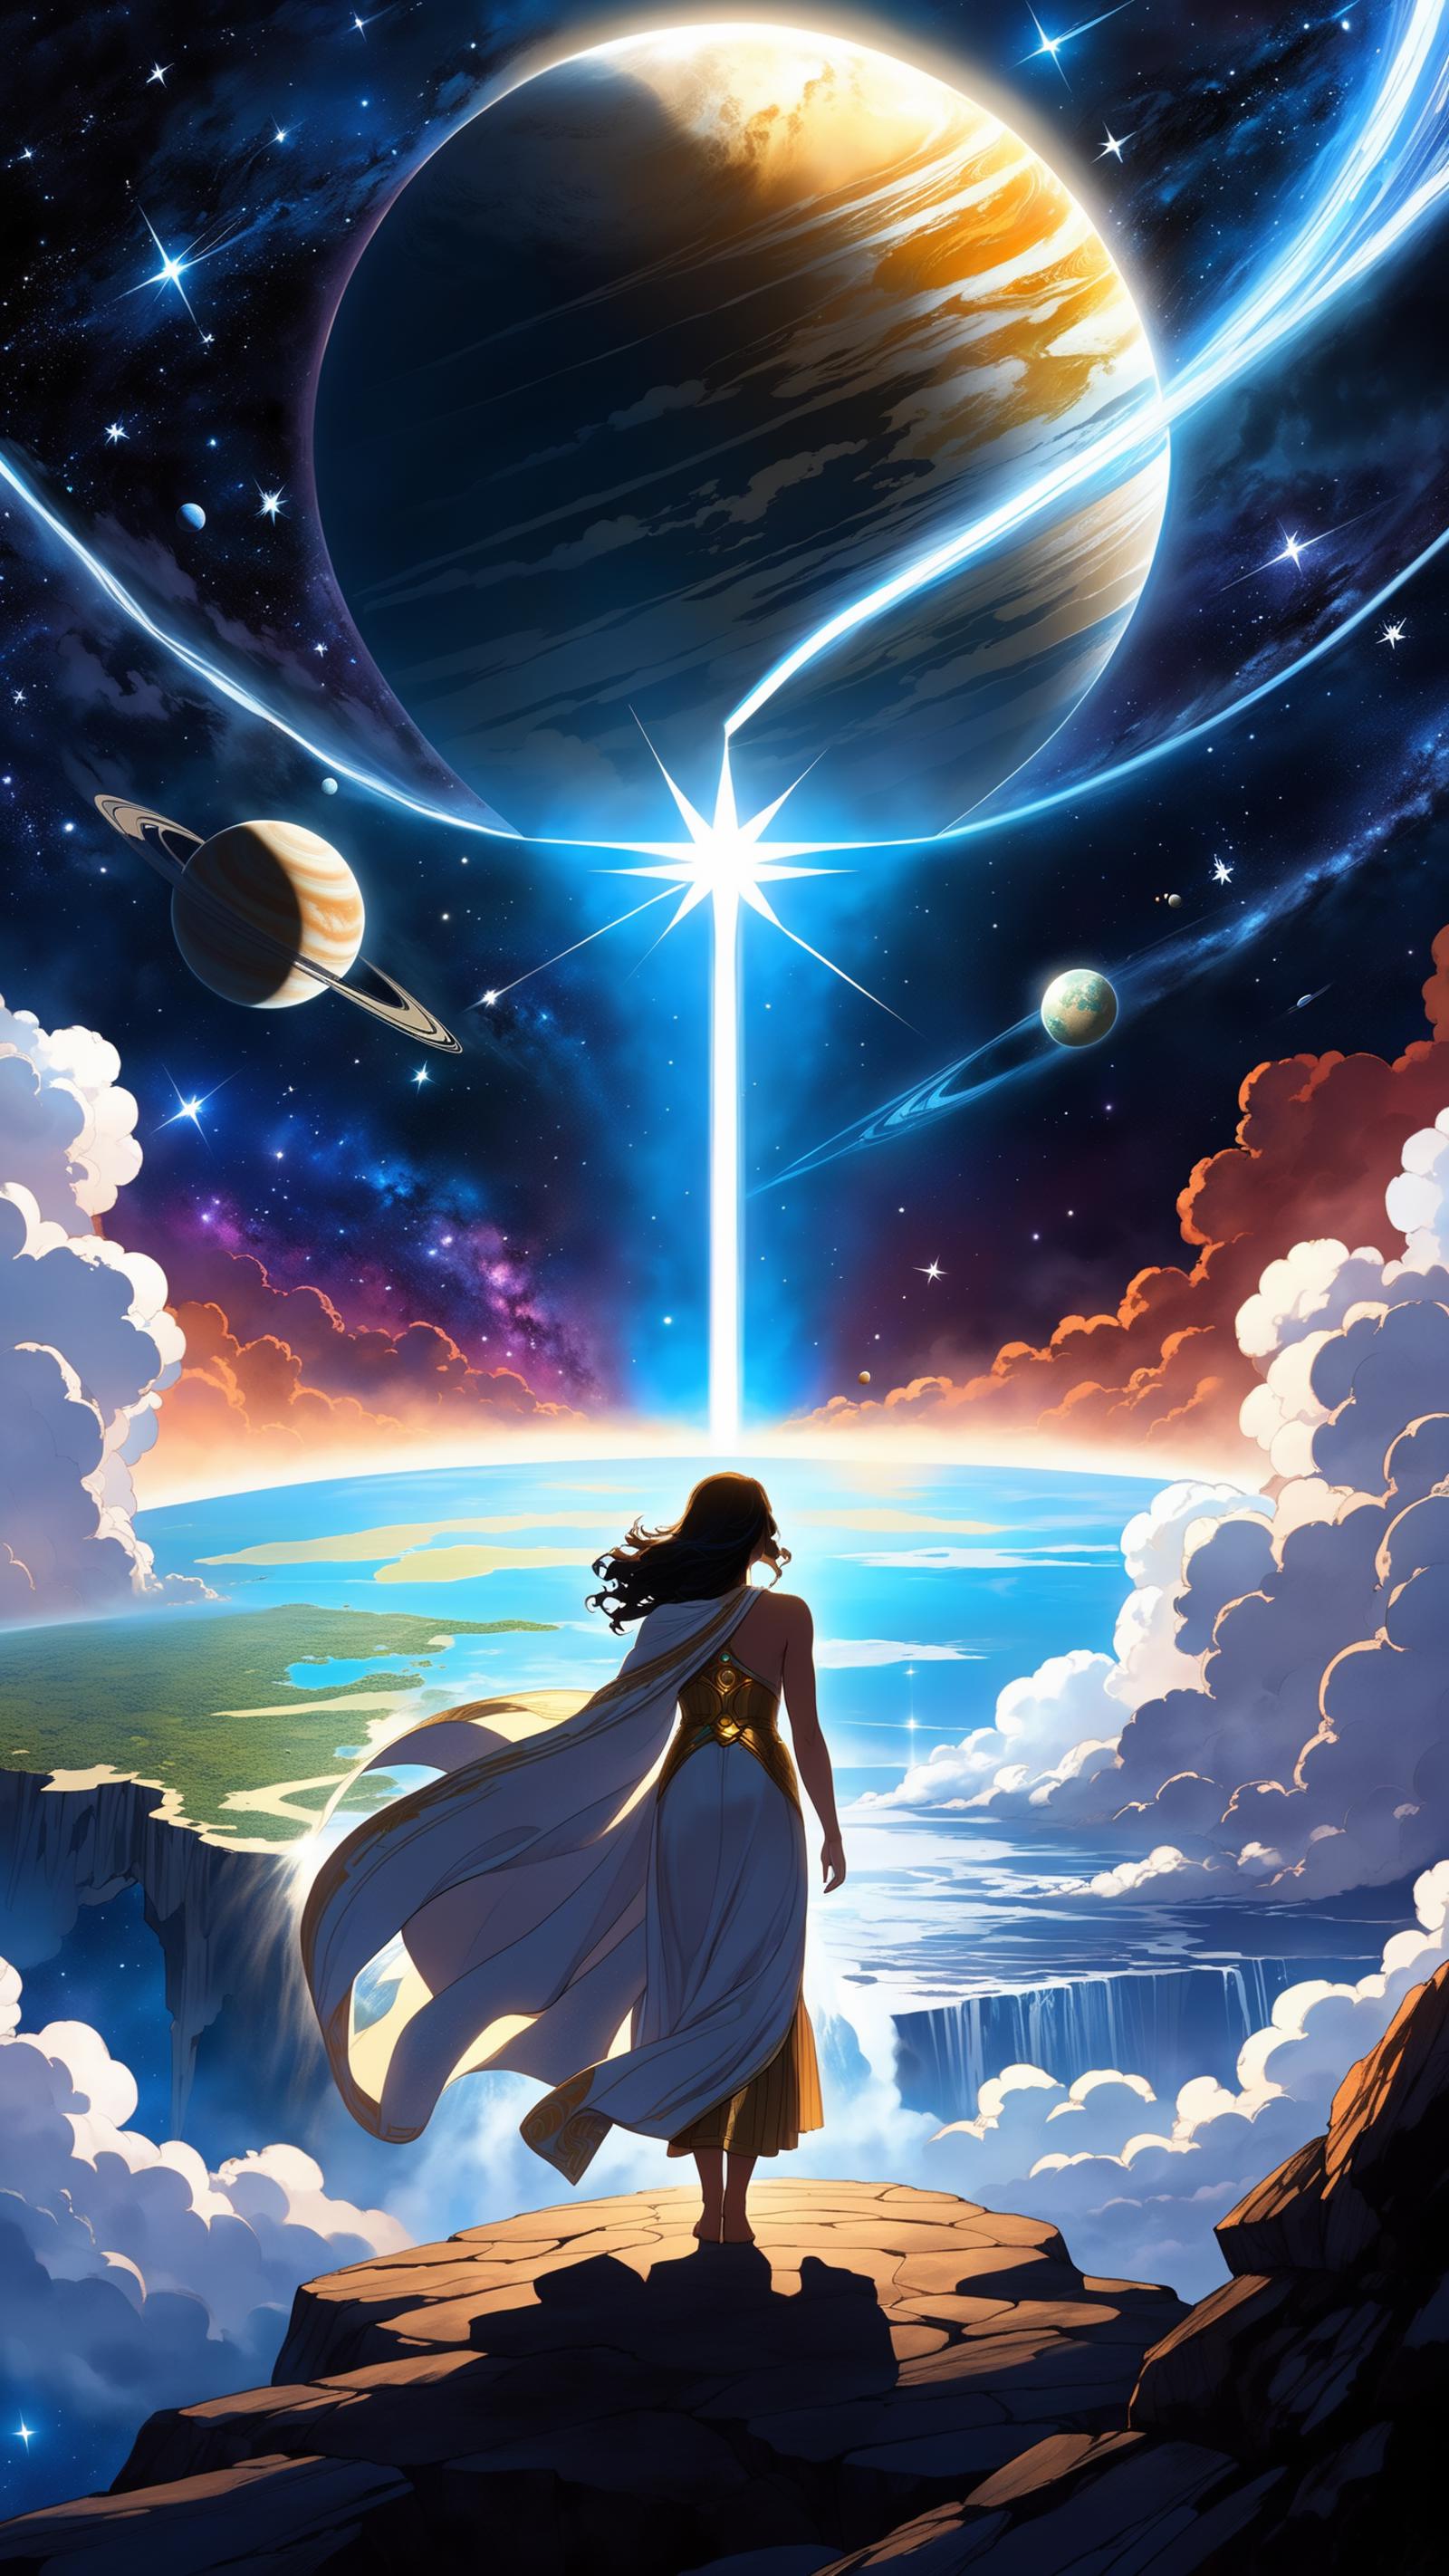 A woman in a long white dress walking on clouds with a backdrop of planets and a star.